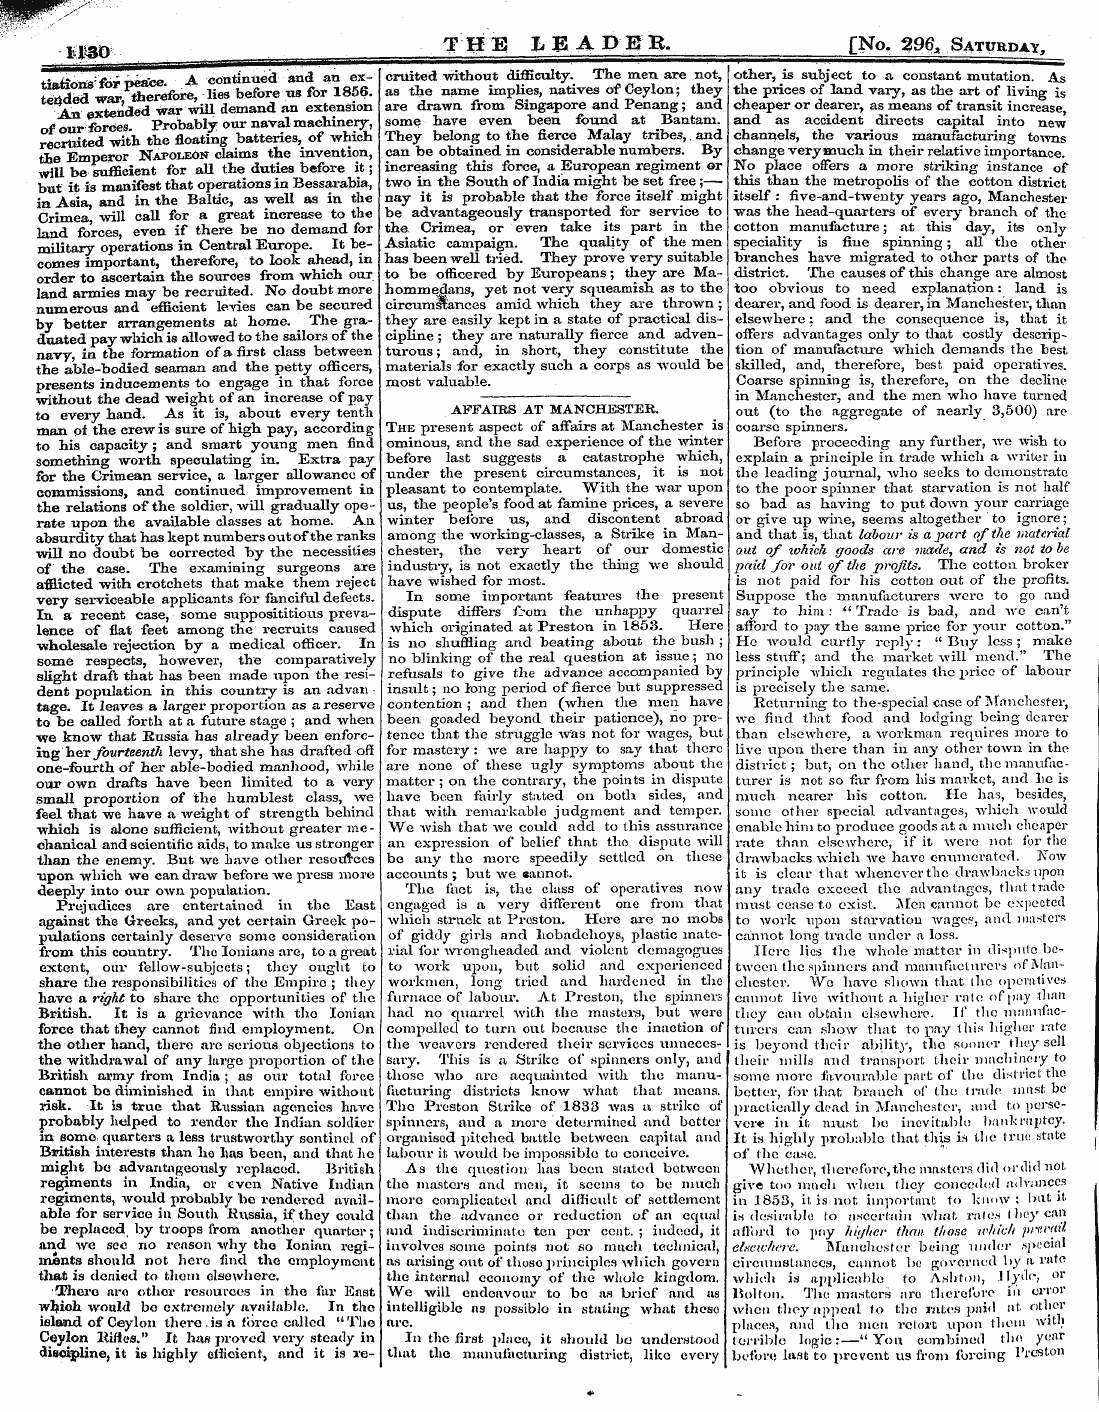 Leader (1850-1860): jS F Y, 2nd edition: 14